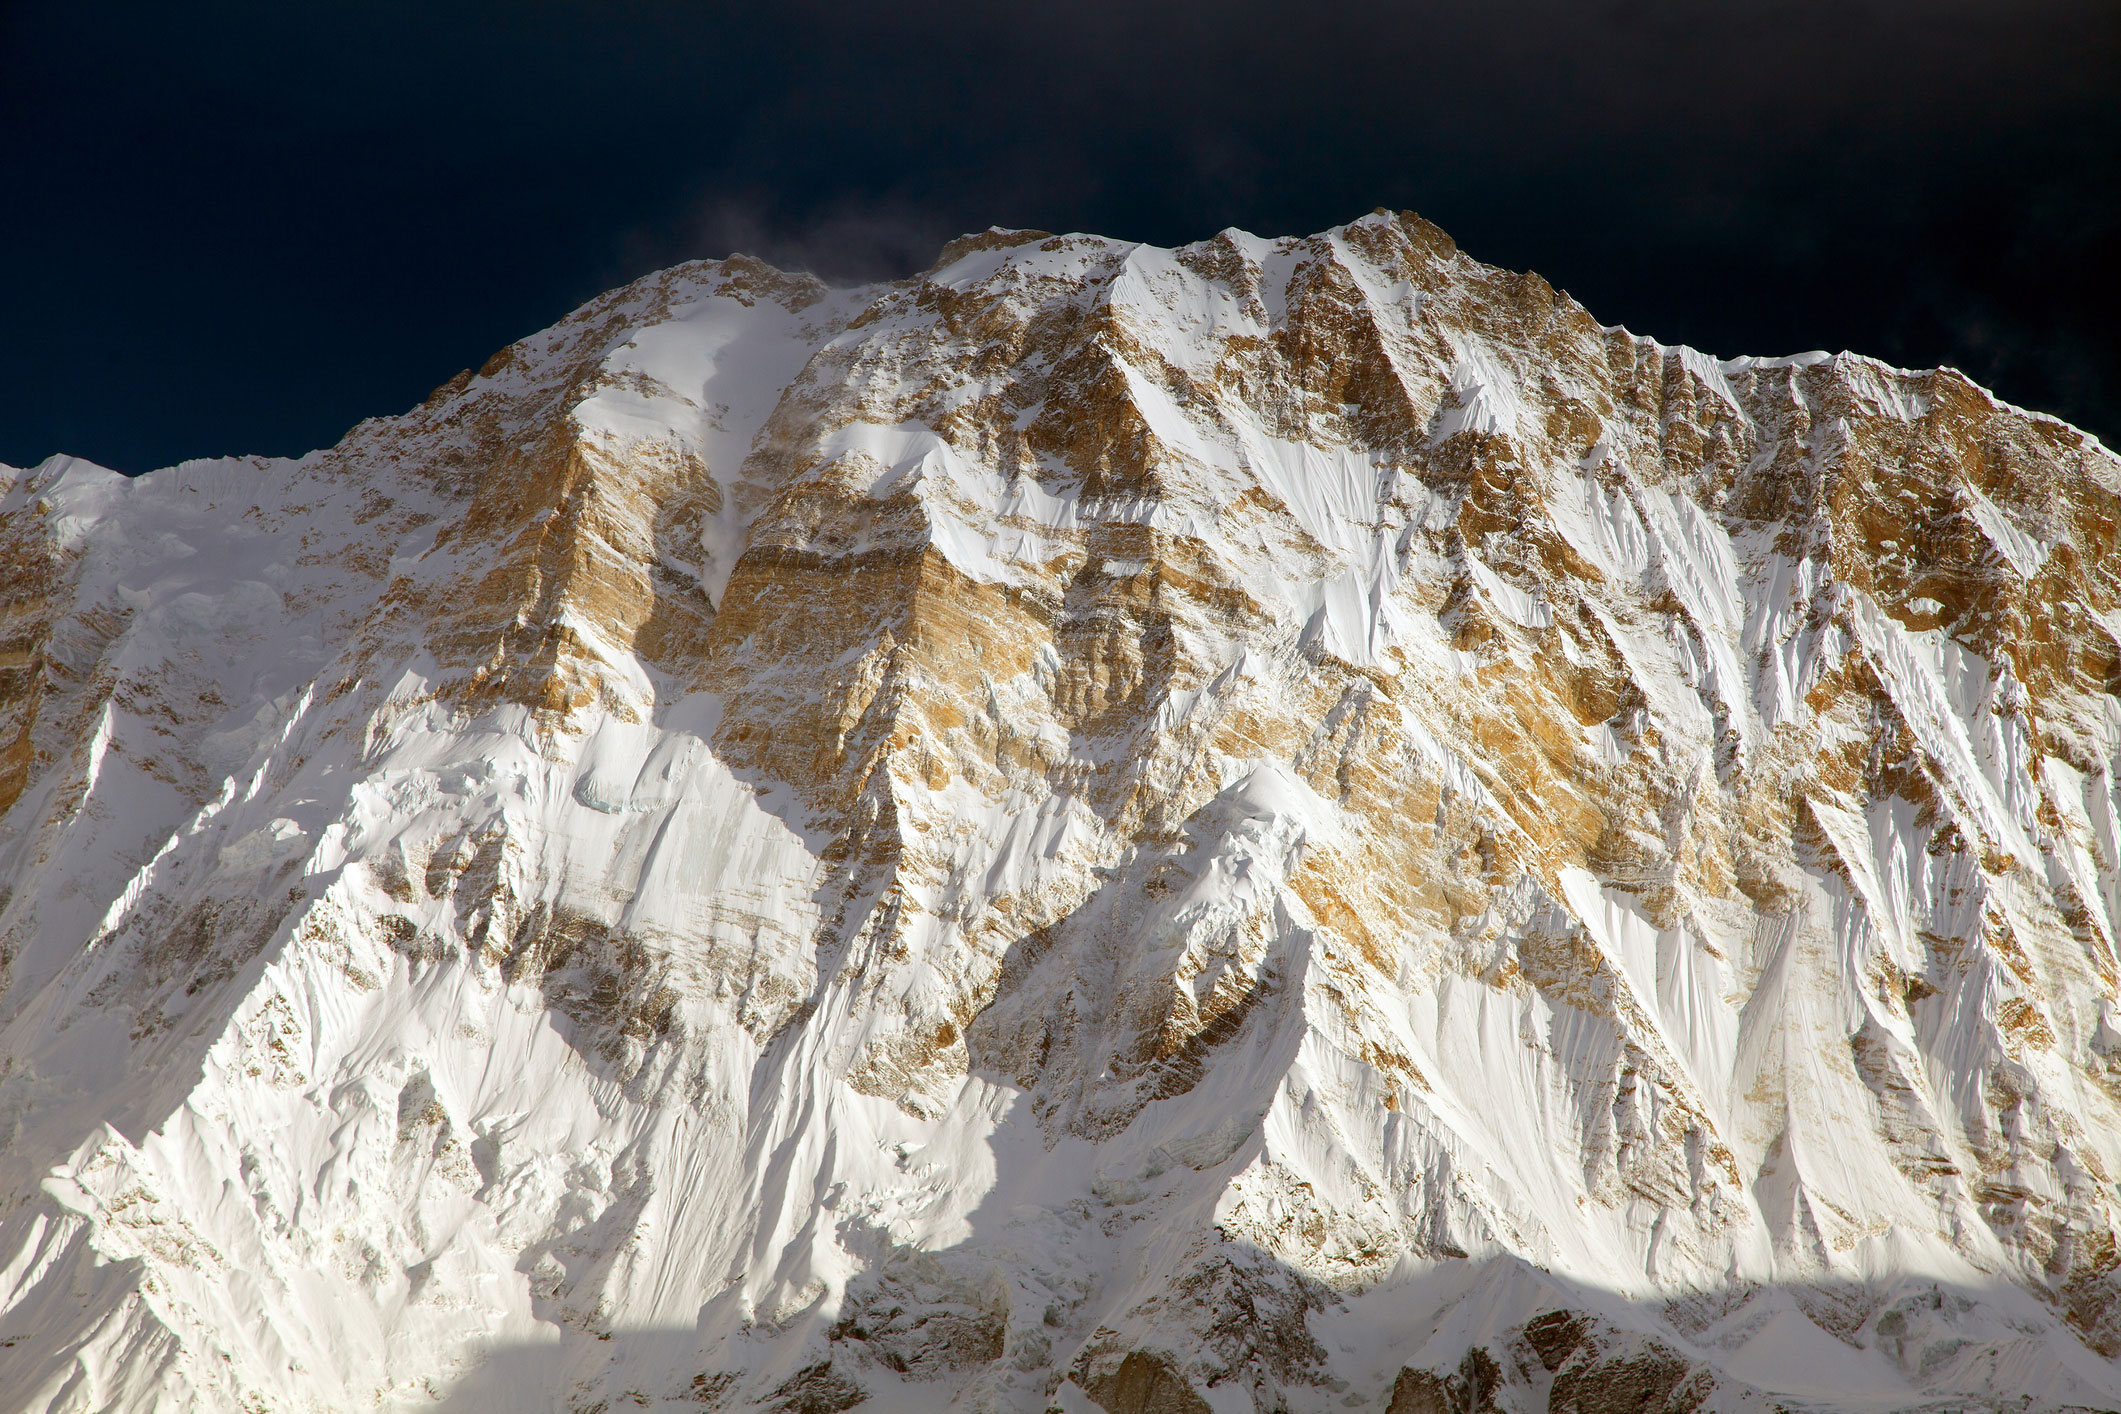 What are the world's most dangerous mountains to climb?